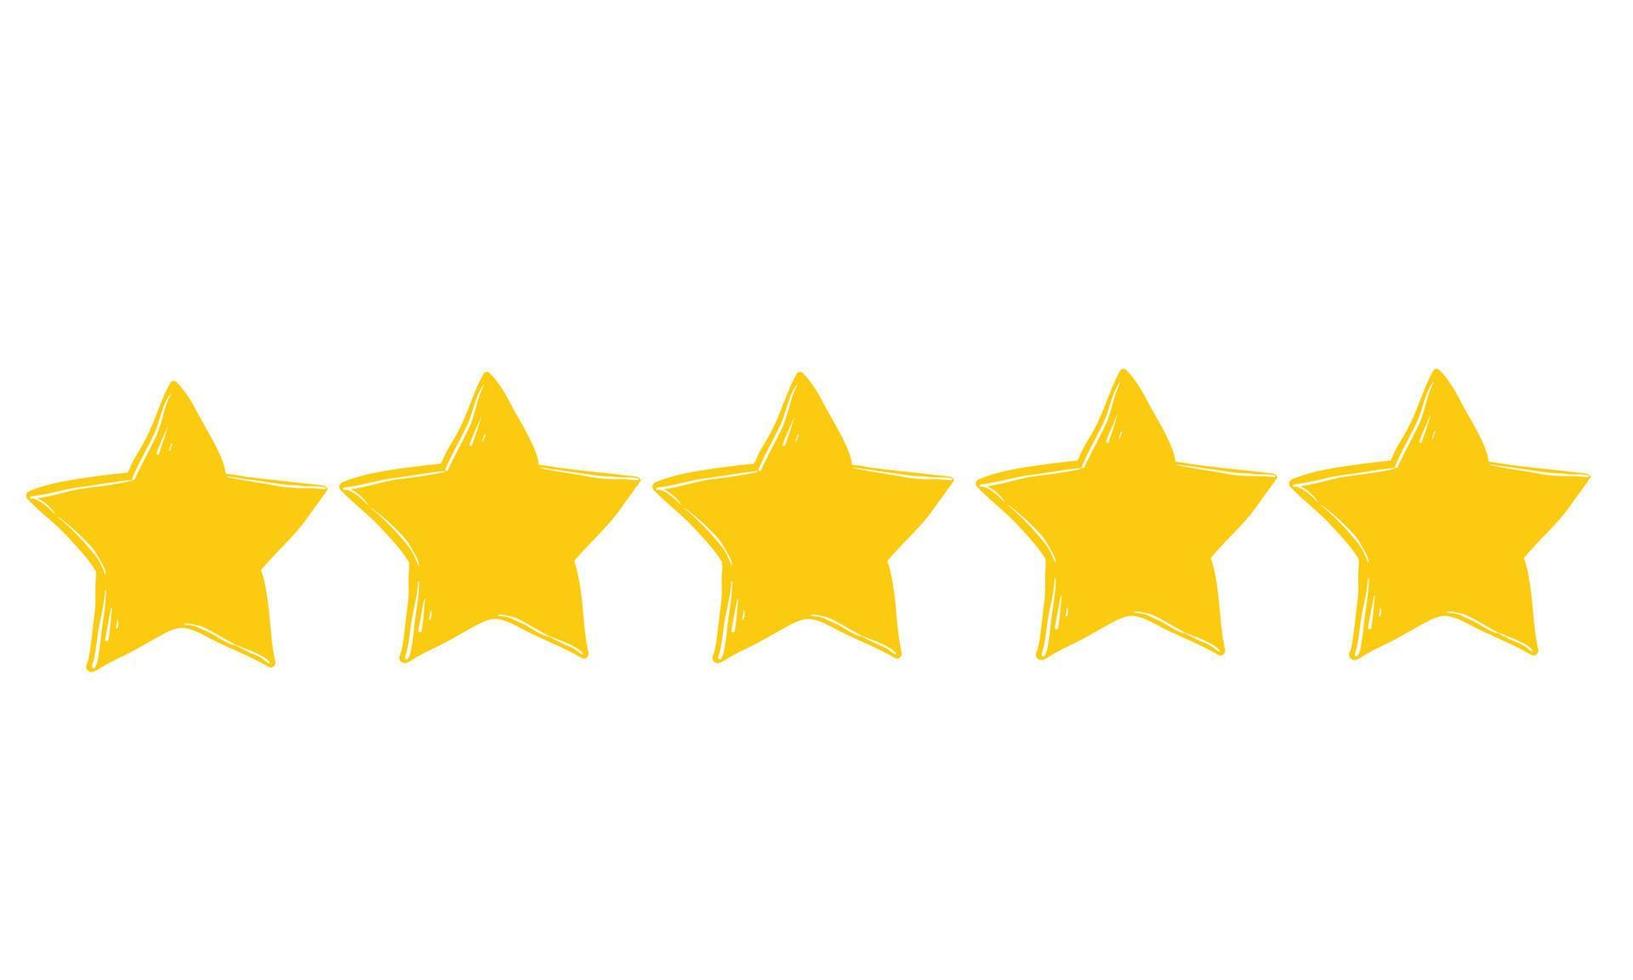 doodle Stars rating icon set. Gold star icon set isolated on a white background with hand drawn style vector